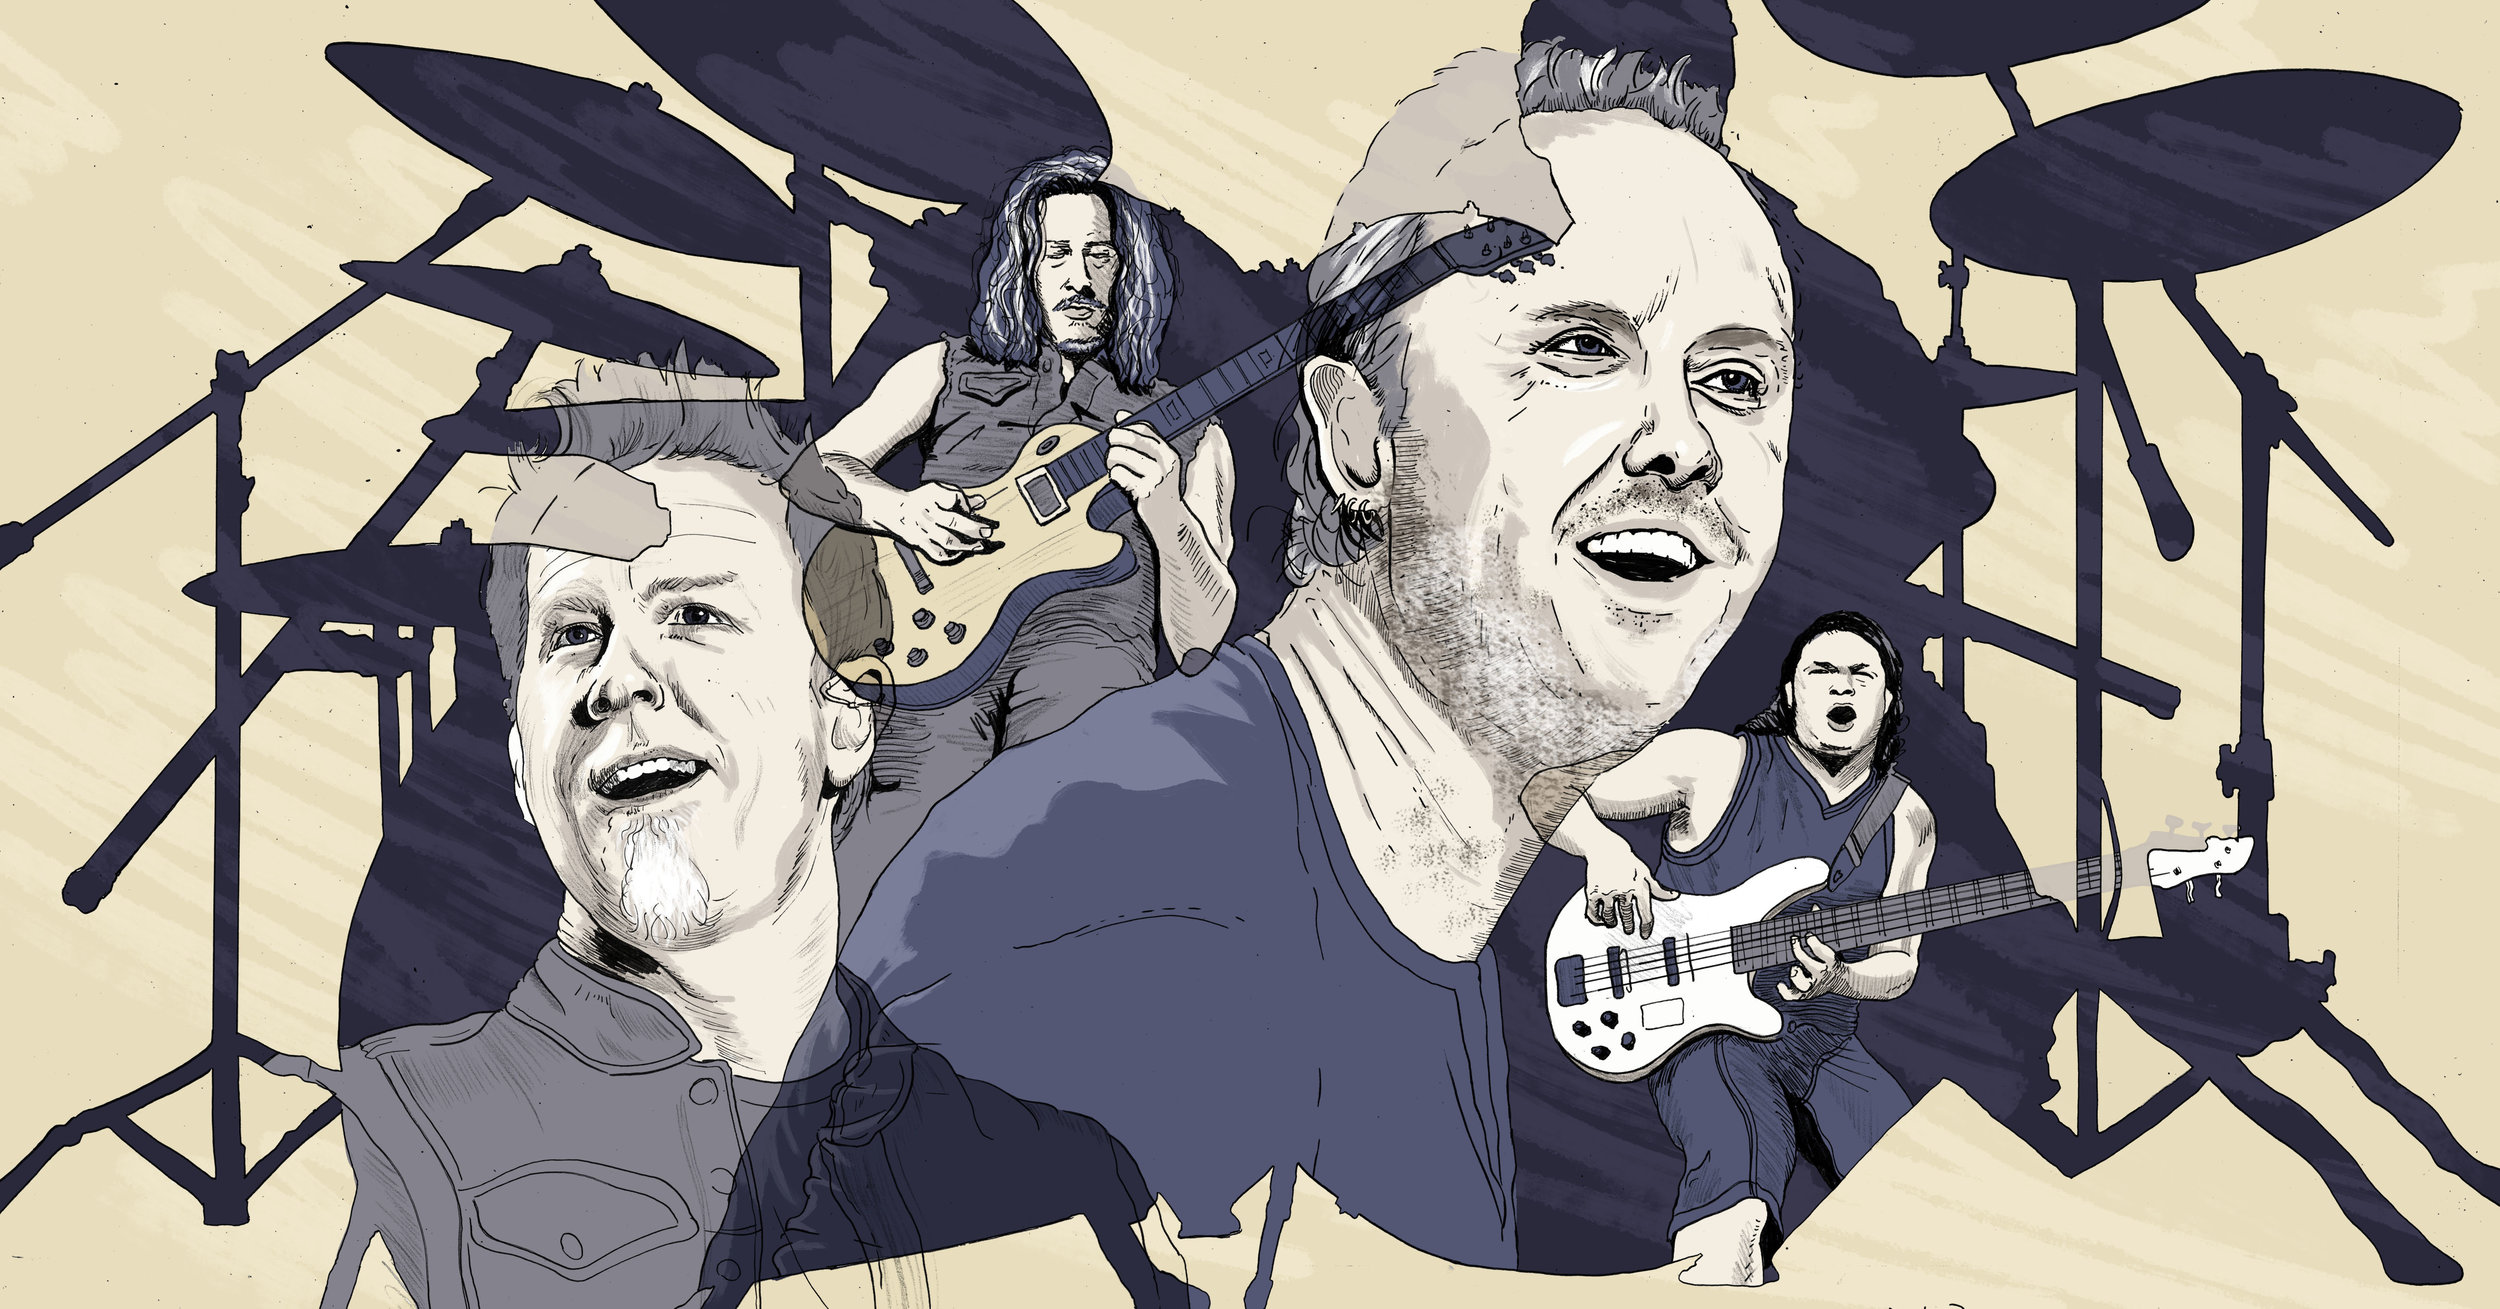 Metallica / an interview with Lars Ulrich by Kim Kelly